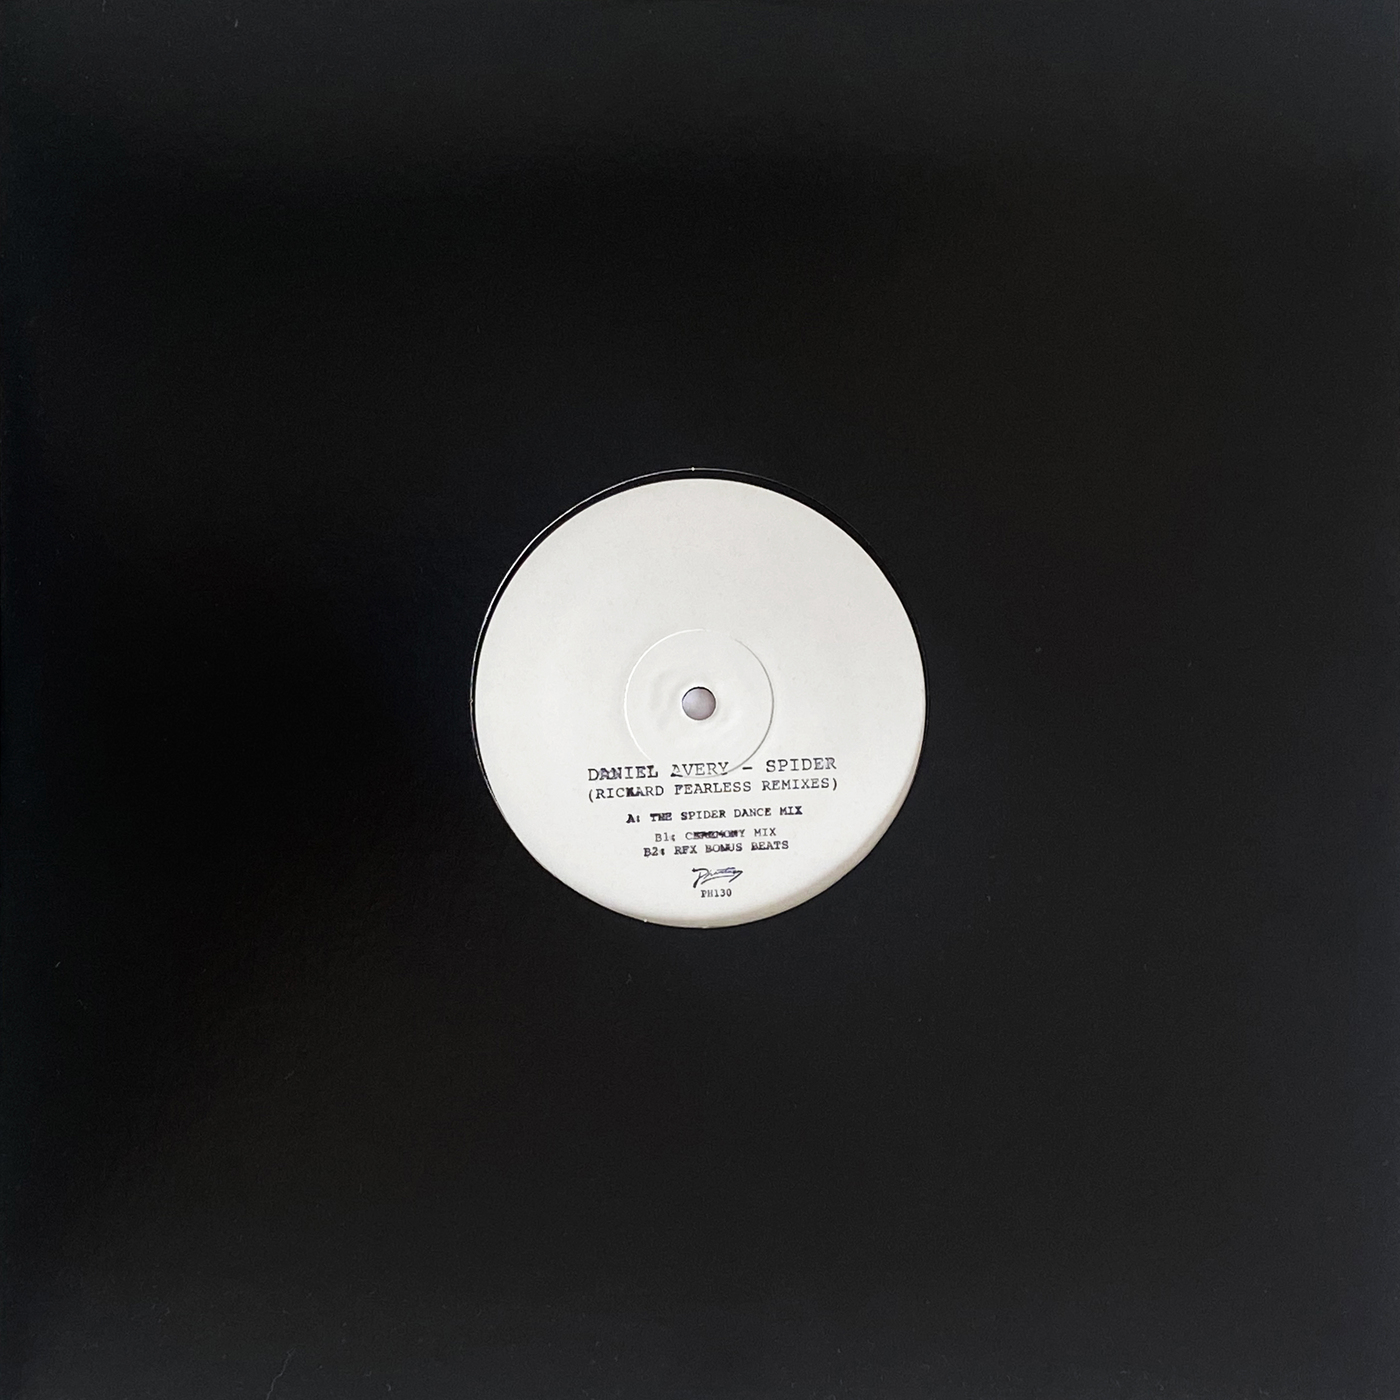 image cover: Daniel Avery - Spider (Richard Fearless Remixes) on Phantasy Sound